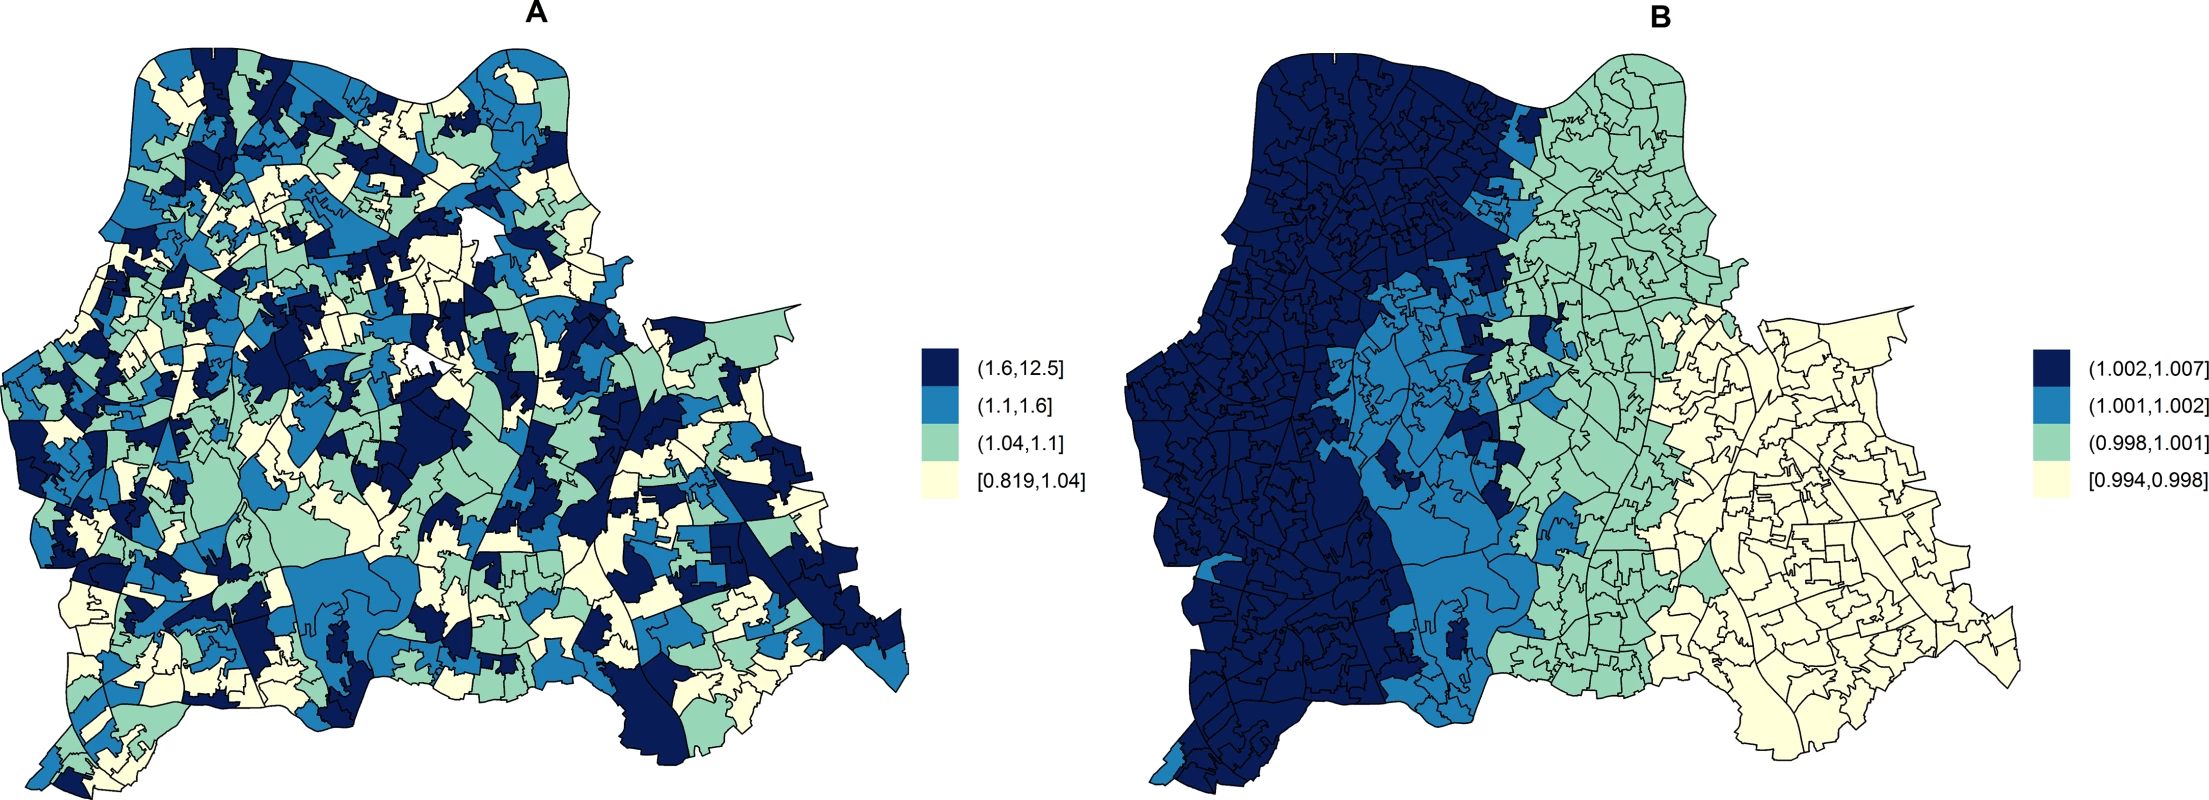 Maps for RR of HA- and CA-MRSA in LSOAs compared to the whole catchment area, in ecological regression models accounting for area-specific quintile-stratified percentage of usual residents attending a hospital and households deprived in 2–4 dimensions (HA-MRSA) or 1–2 dimensions (CA- MRSA).